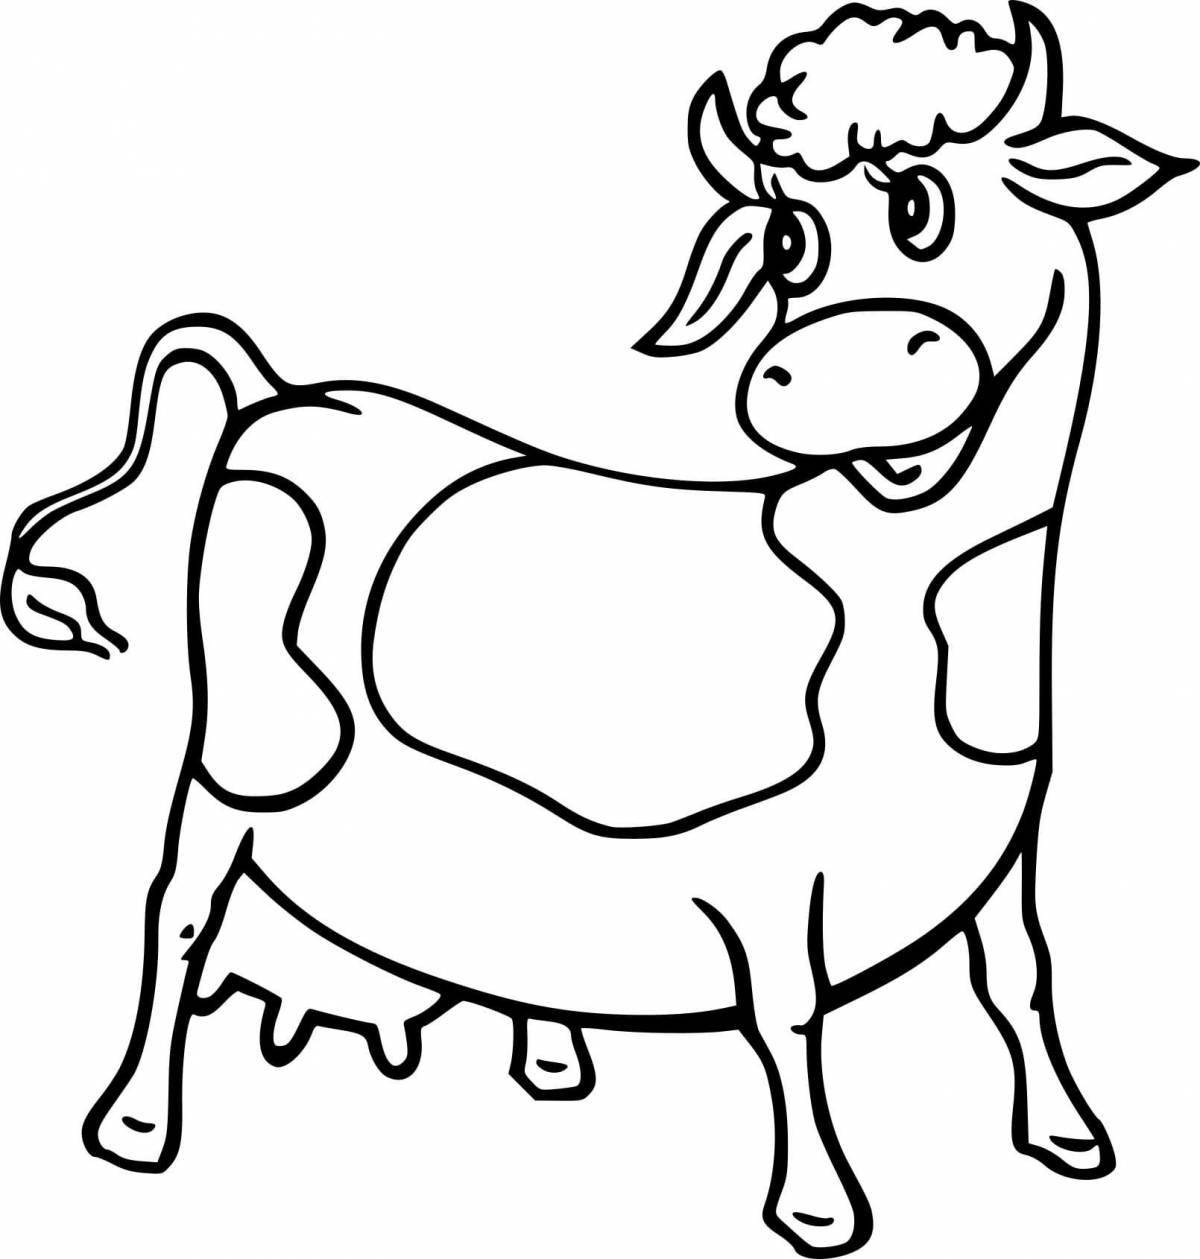 Playful cow coloring book for kids